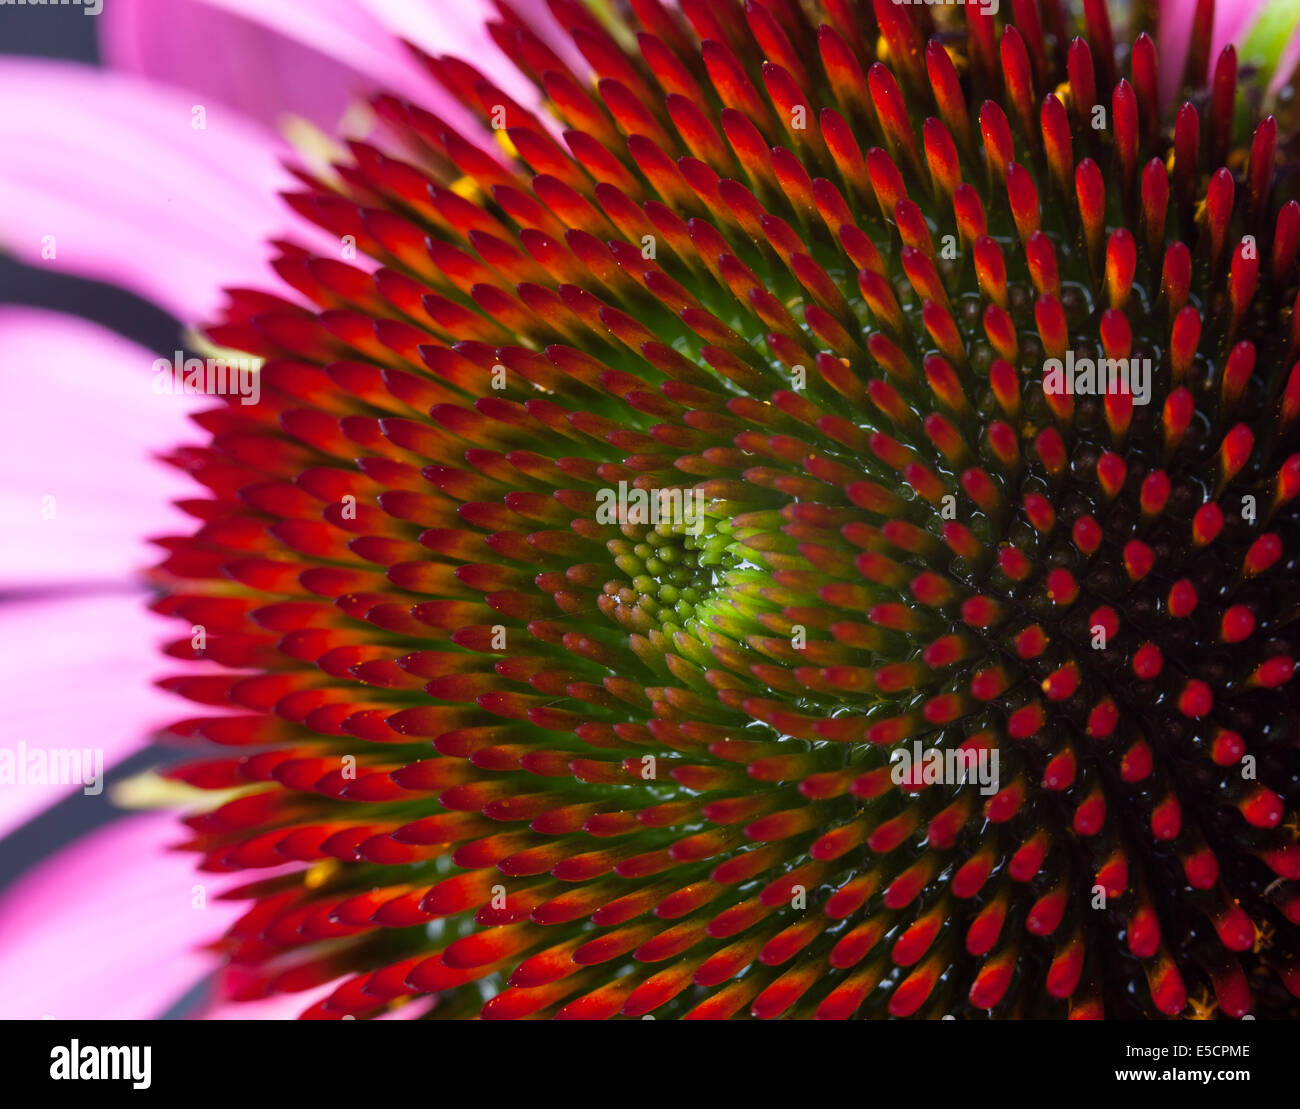 Flower close up macro background abstract shot Stock Photo